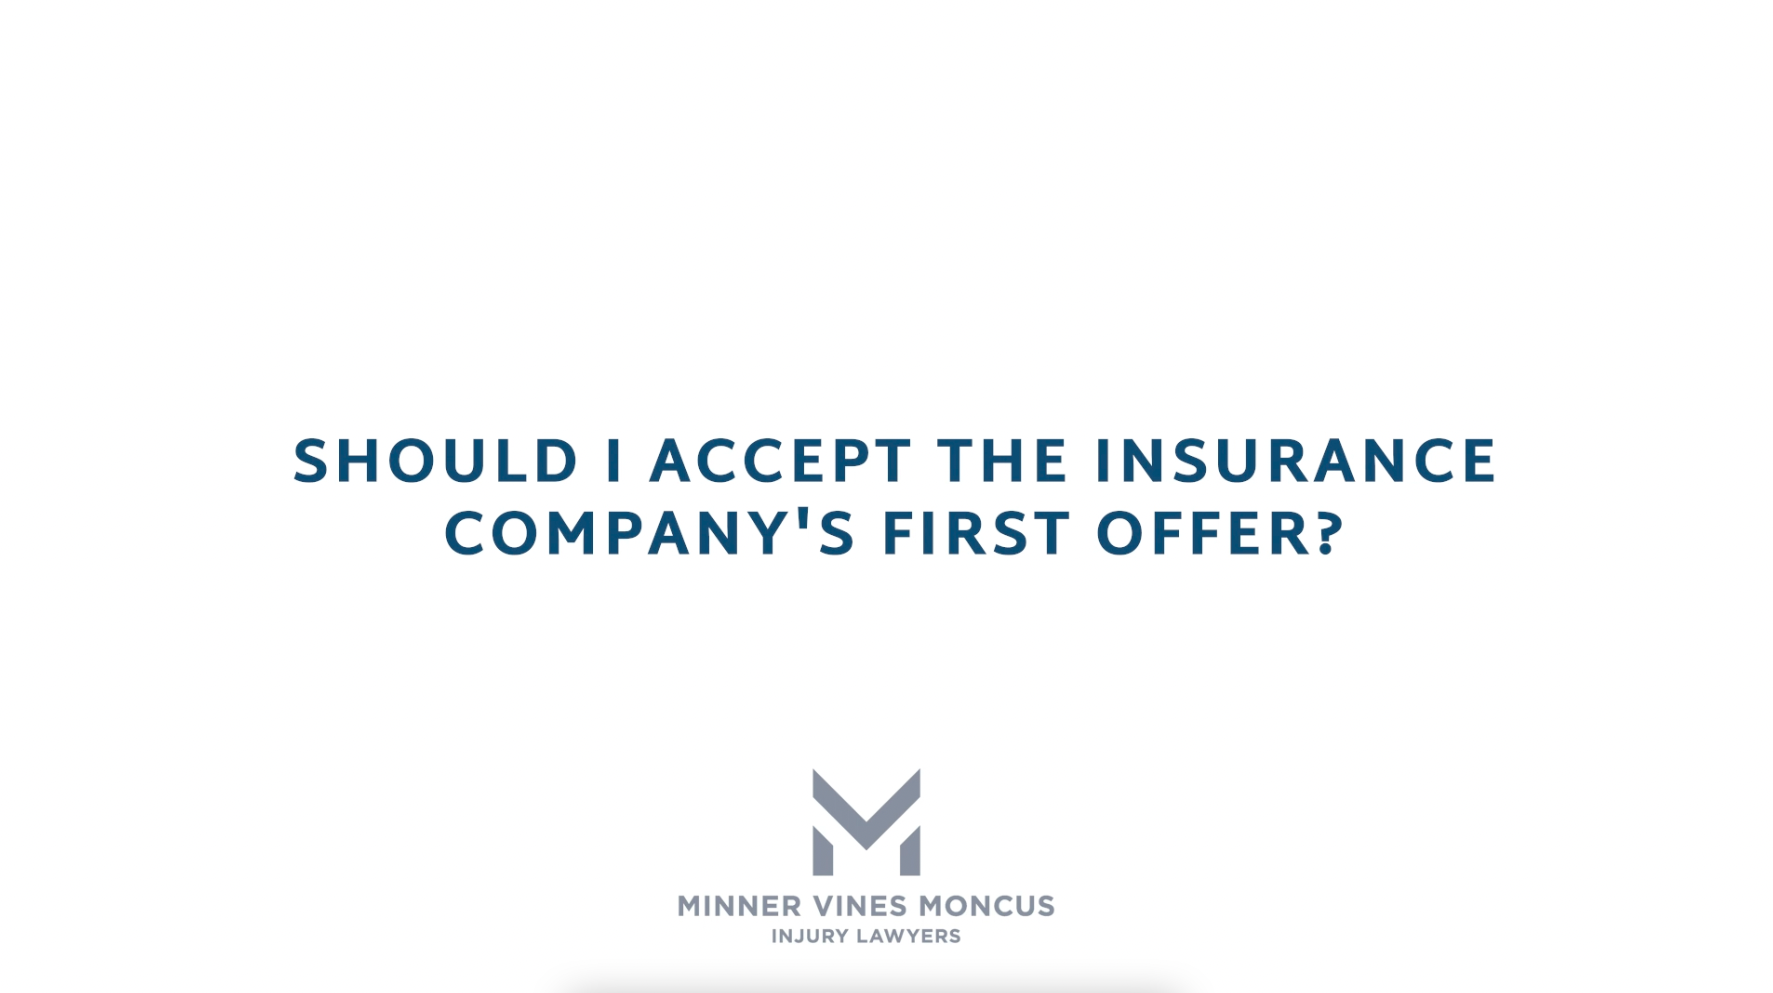 Should I accept the insurance company’s first offer?